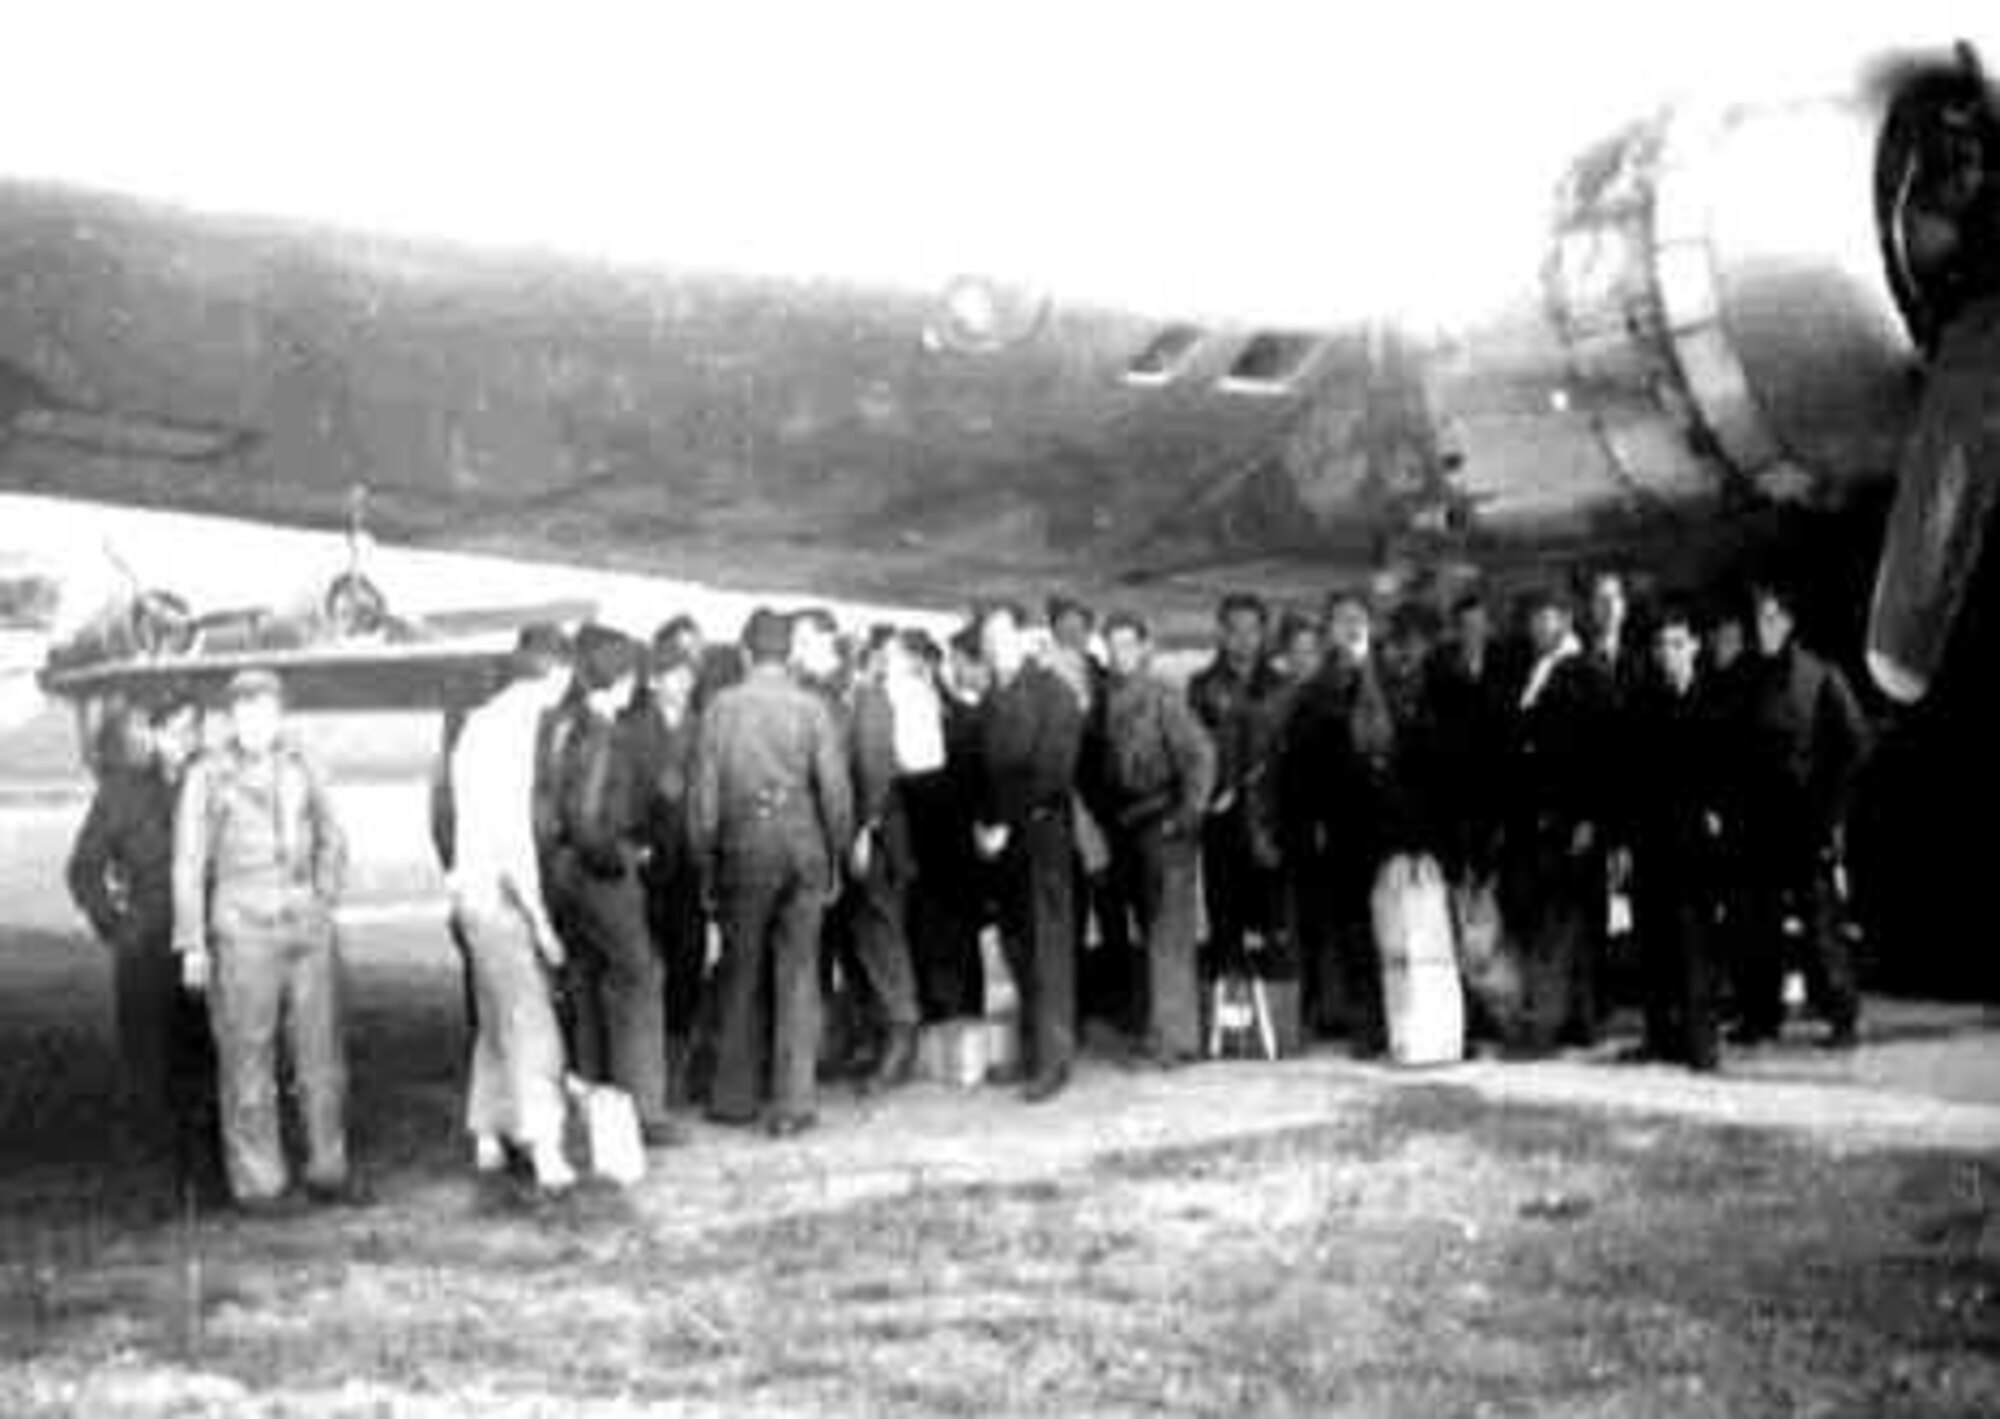 The 92nd Bombardment Group lost a B-17 flying Fortress and 10 crewmembers during a bombing mission over Merseburg, Germany, in 1944. The group then flew Operation Revival missions the following year, transporting formers prisoners of war from Barth, Germany, to U.S. military control. (Courtesy Photo)
